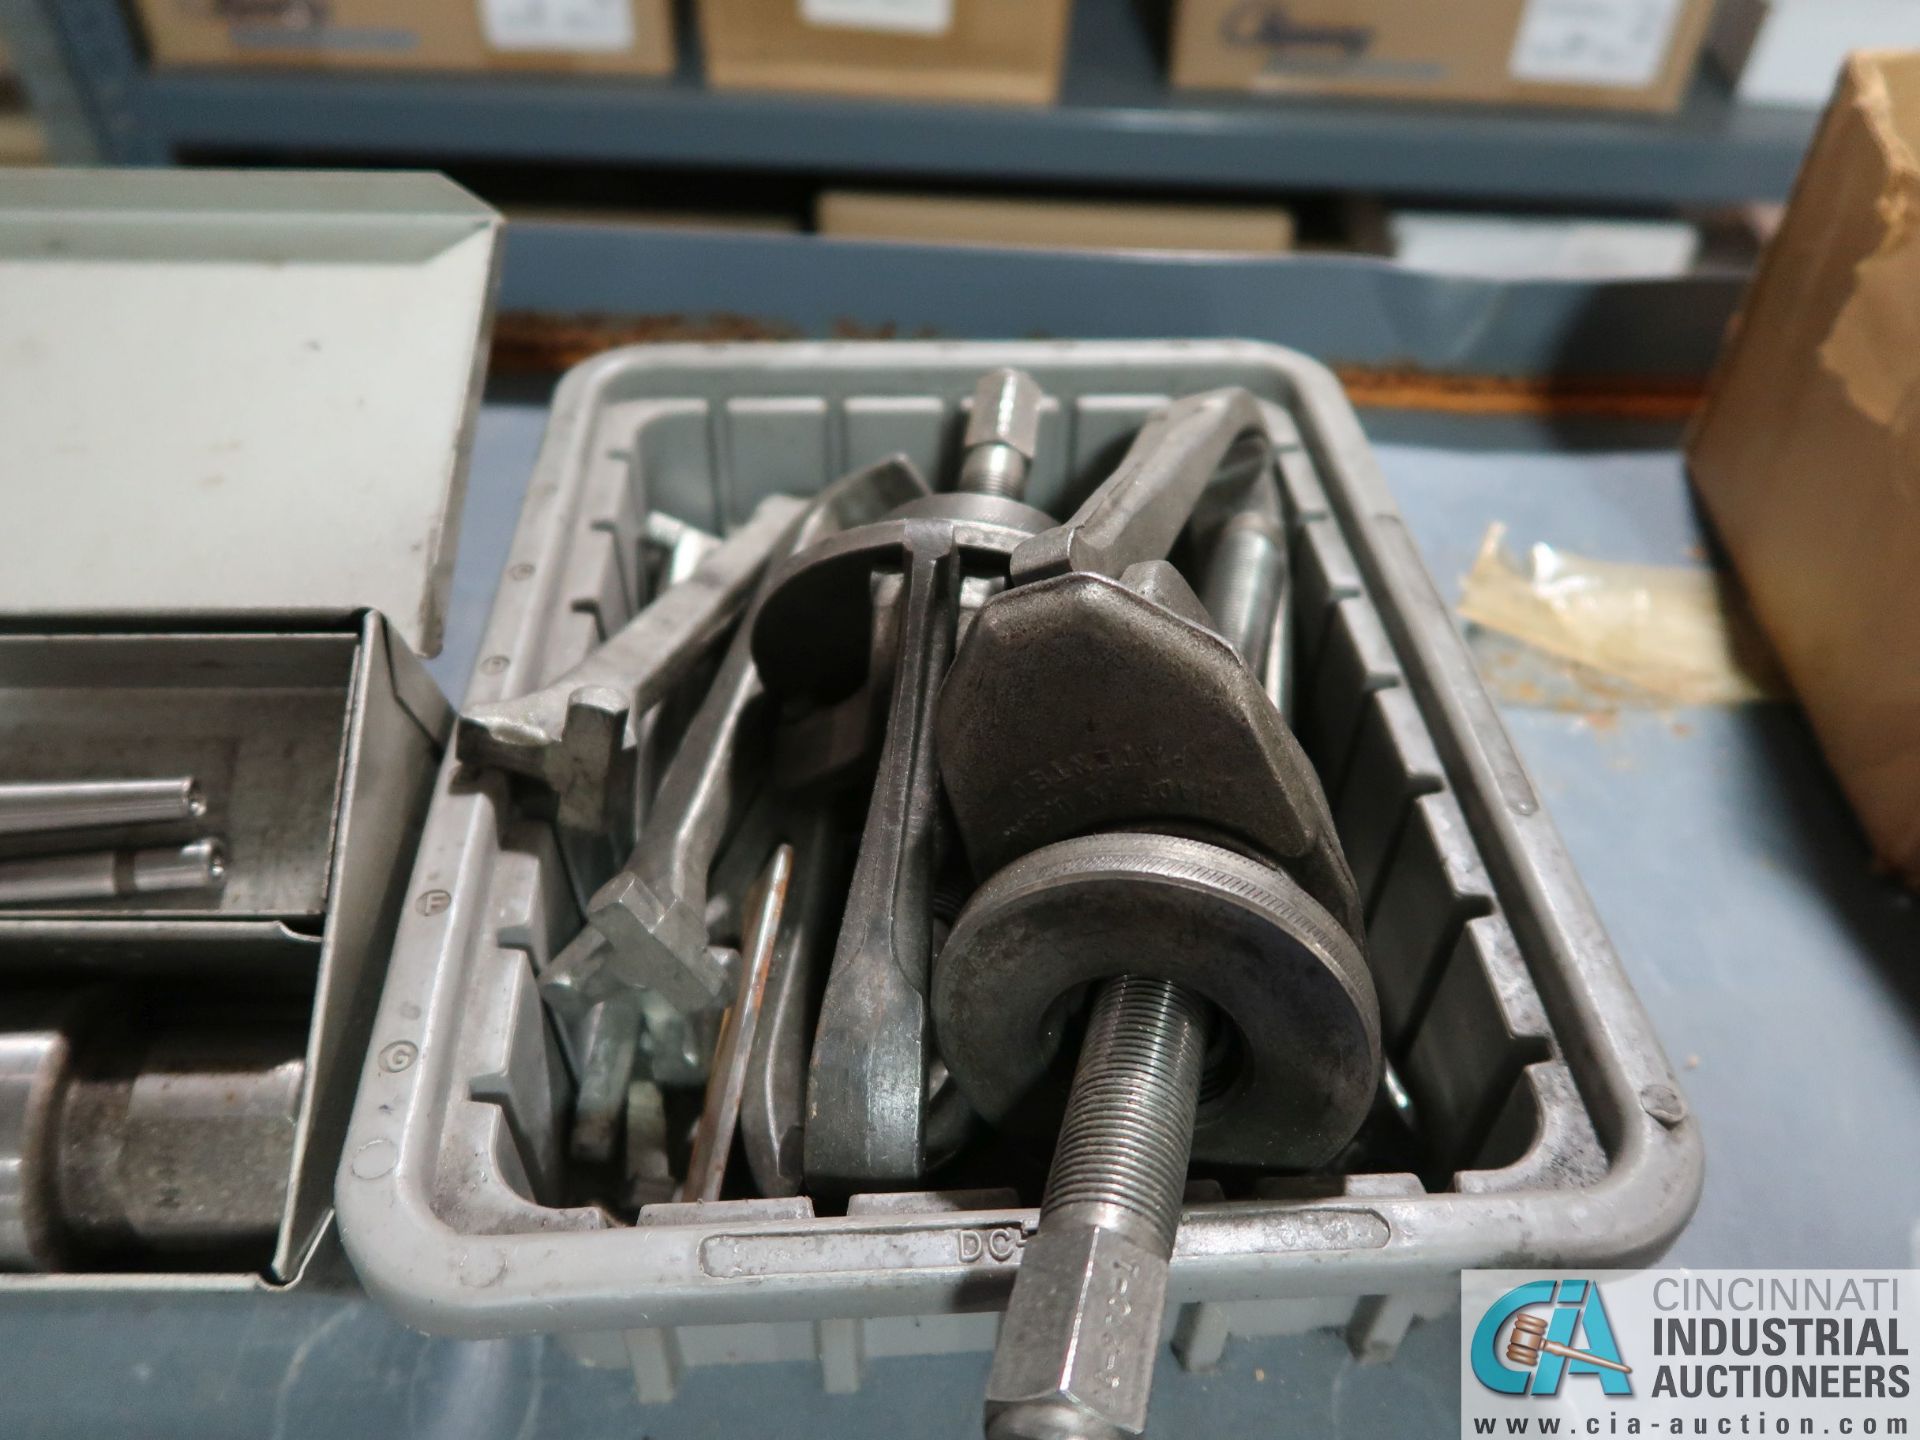 (LOT) 1 TON COFFING TROLLEY, BOX OF REAMERS, GEAR PULLER - Image 3 of 3